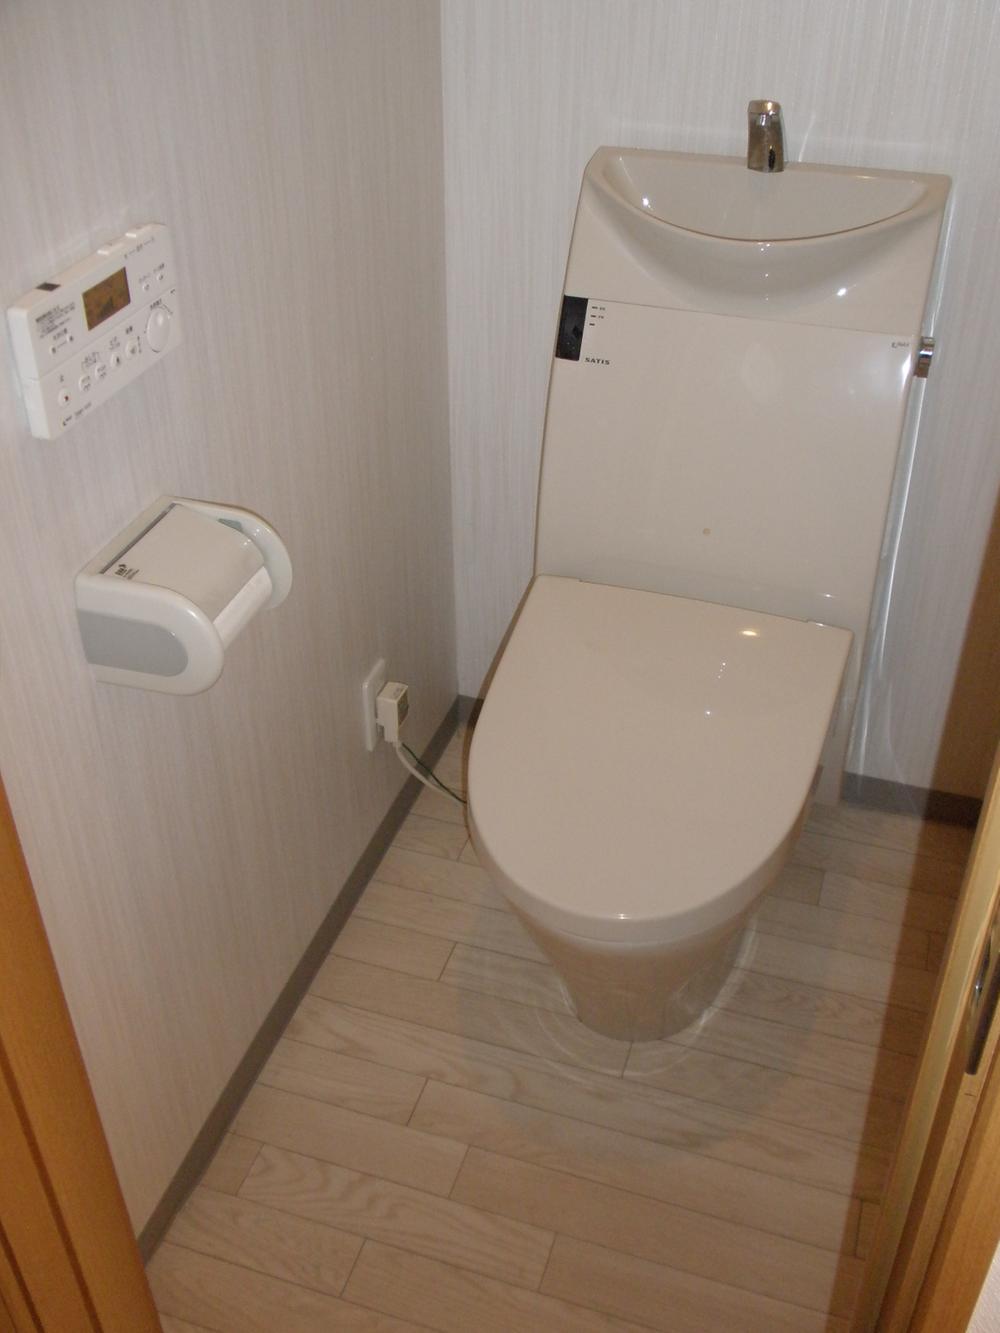 Toilet. Bidet with a toilet that is clean